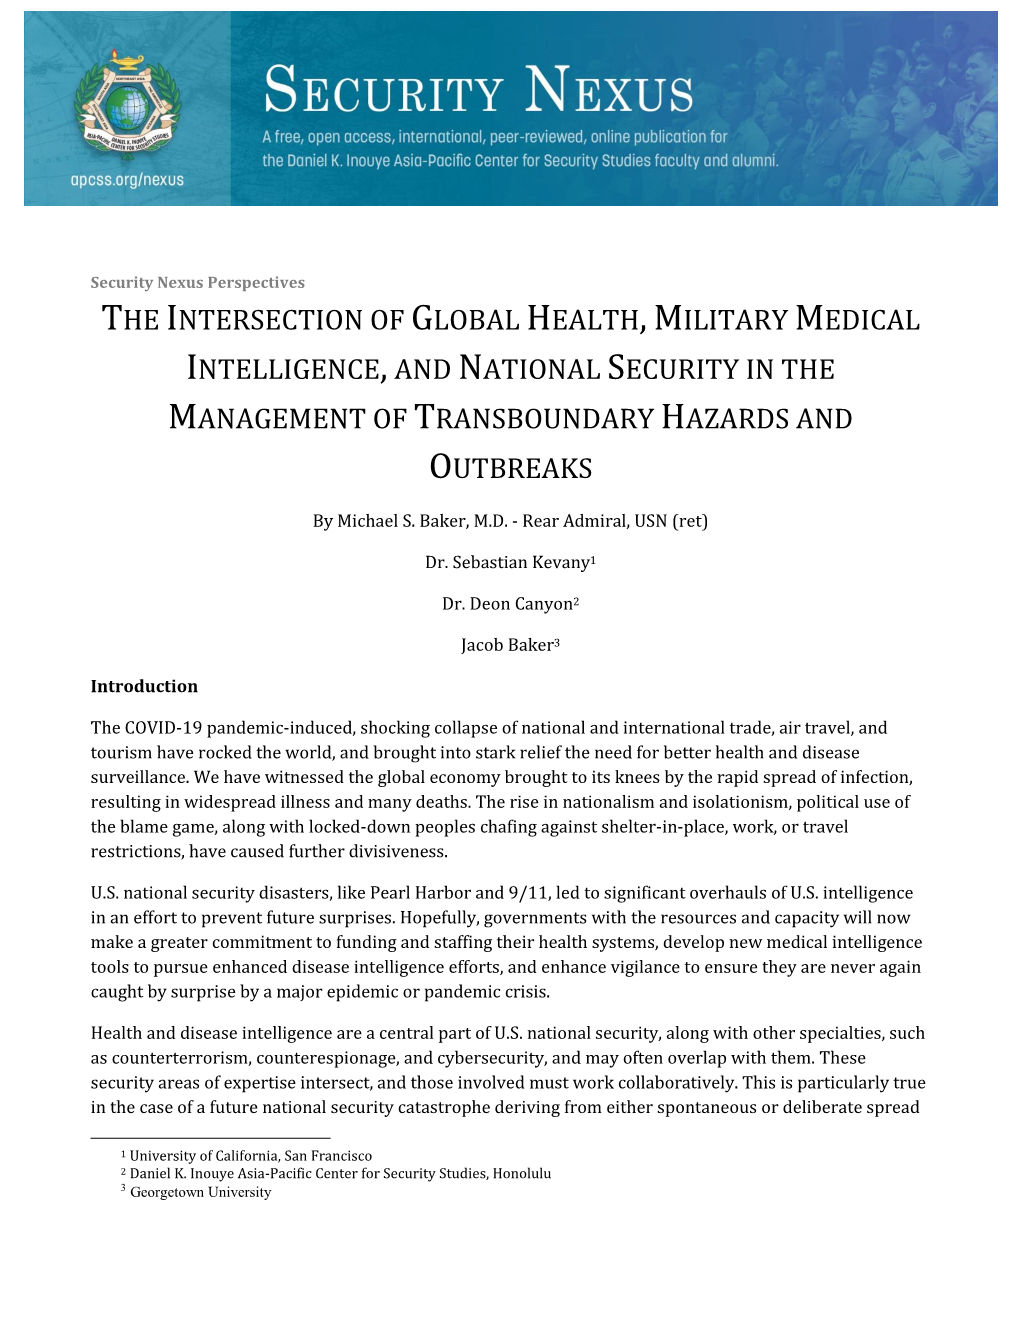 The Intersection of Global Health, Military Medical Intelligence, and National Security in the Management of Transboundary Hazards and Outbreaks